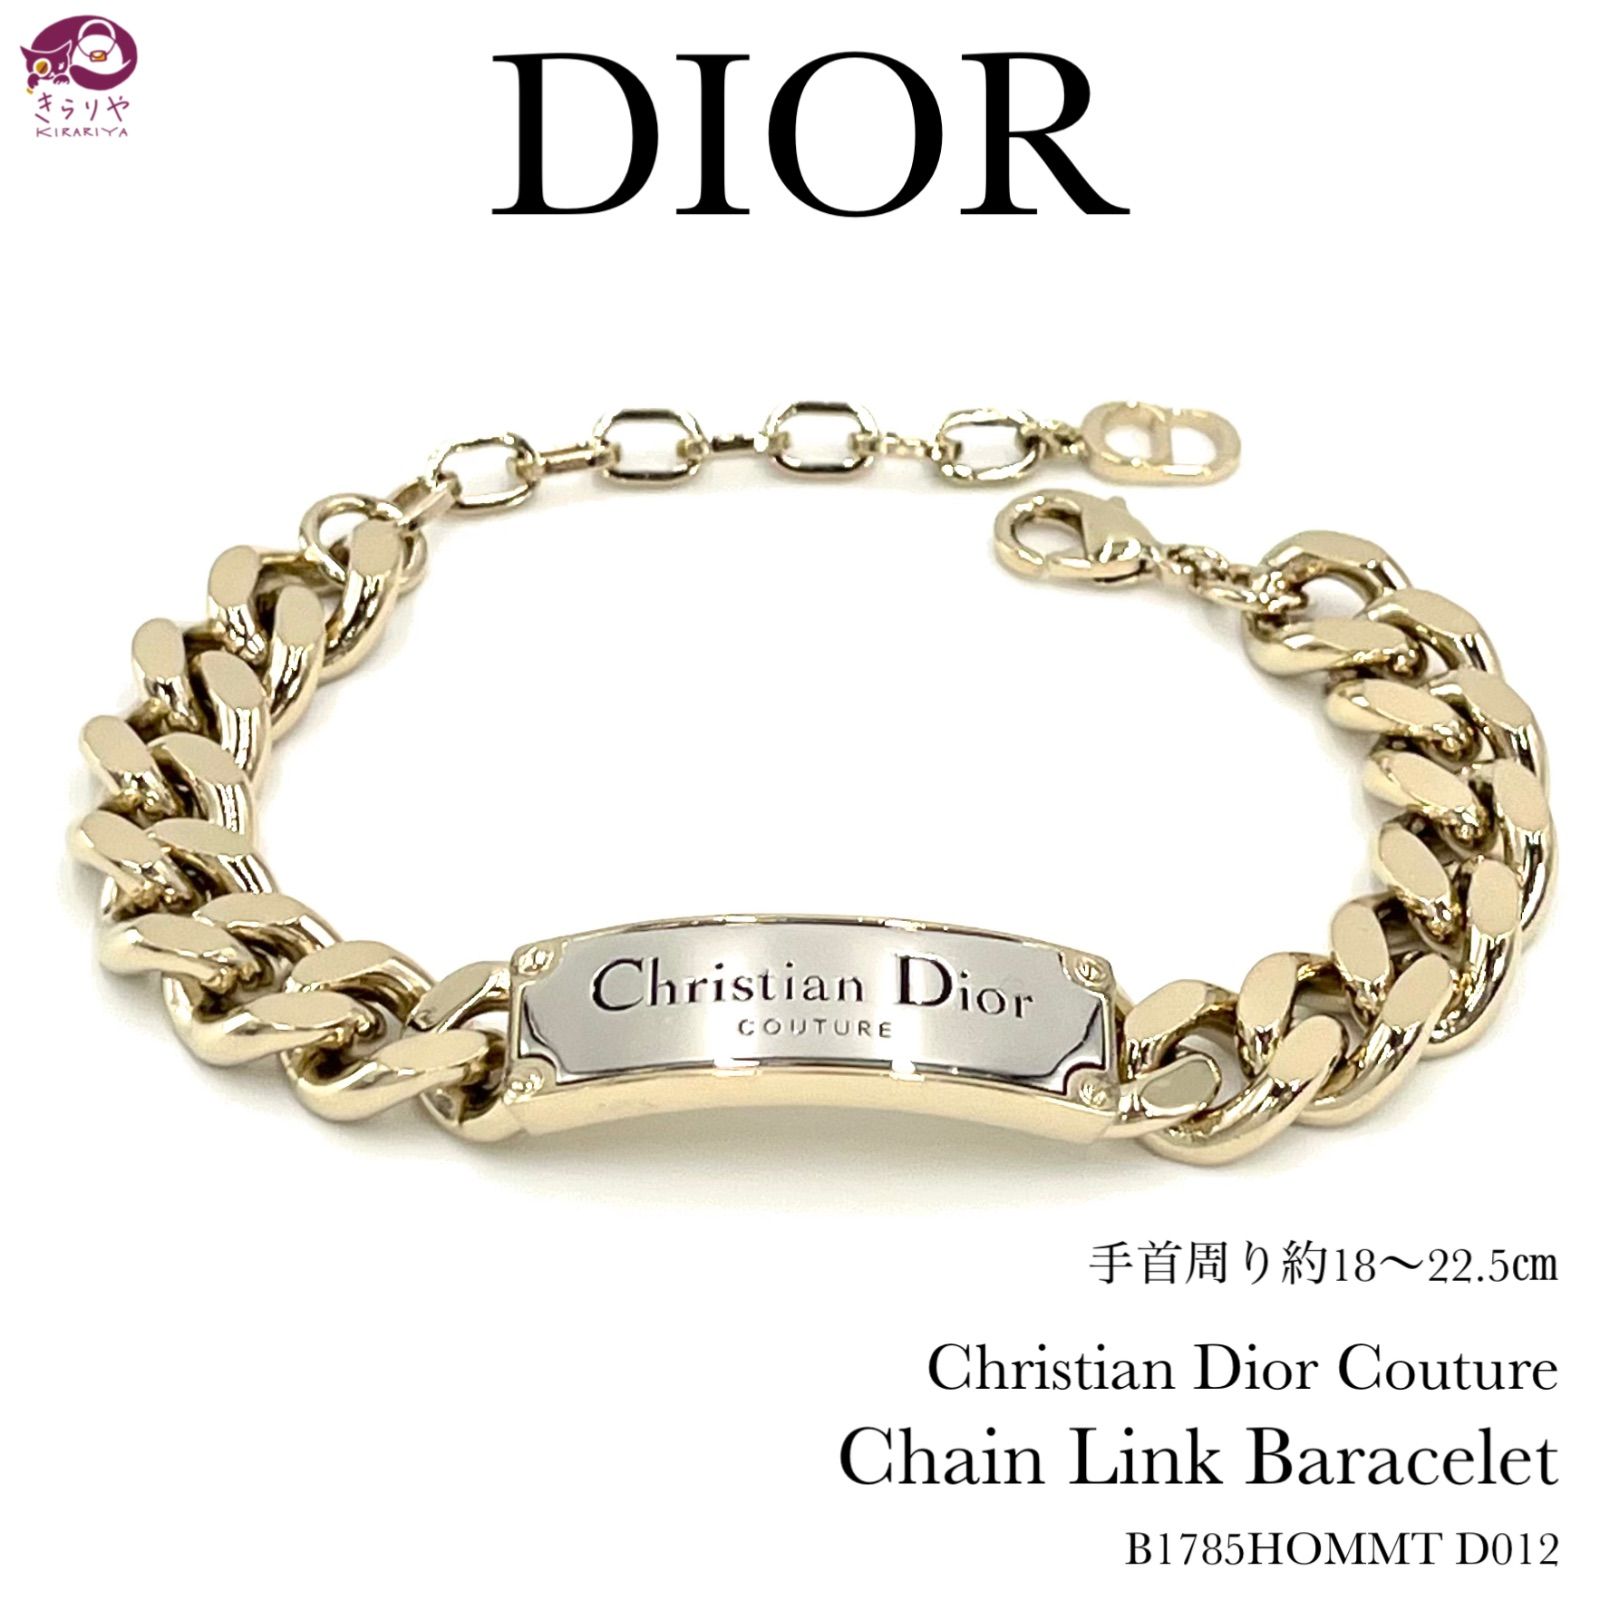 DIOR ディオール B1785HOMMT D012 Christian Dior Couture チェーン ...